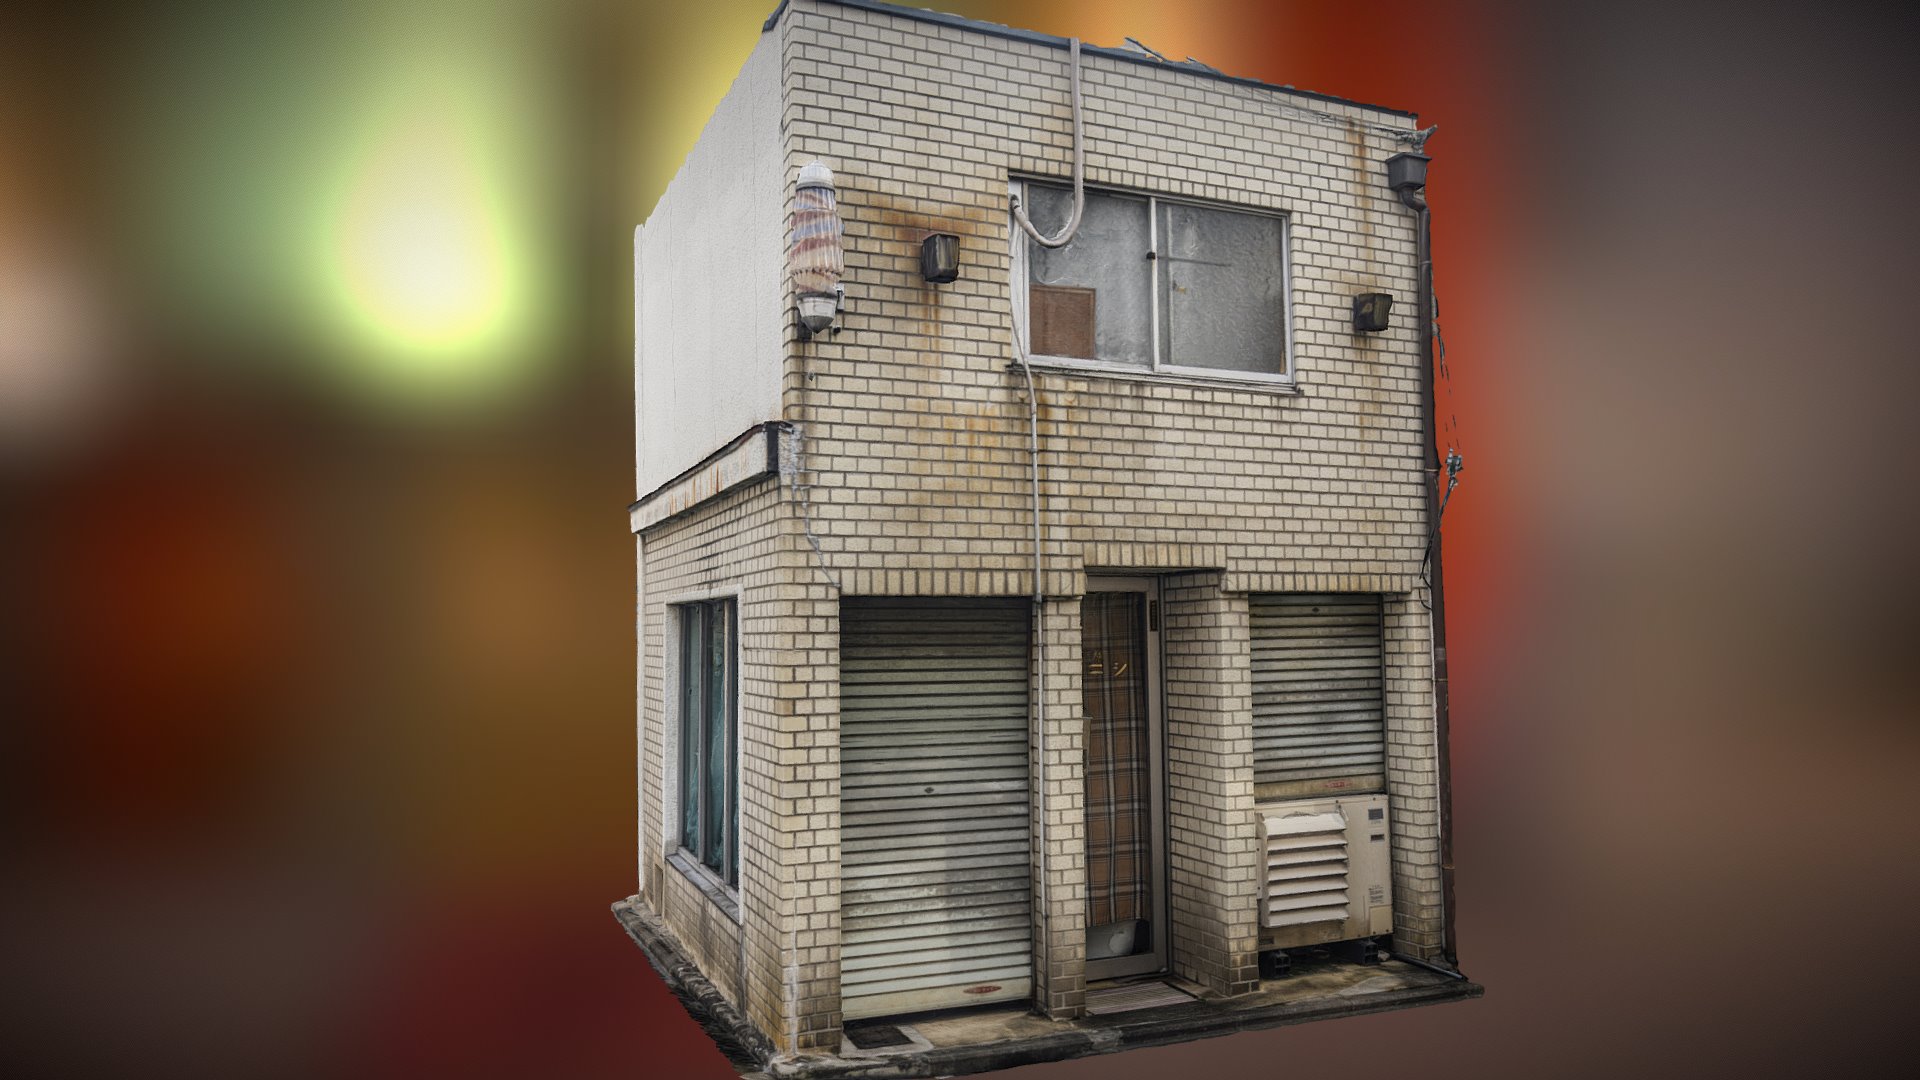 3D model Tokyo building raw scan - This is a 3D model of the Tokyo building raw scan. The 3D model is about a brick building with a green light.